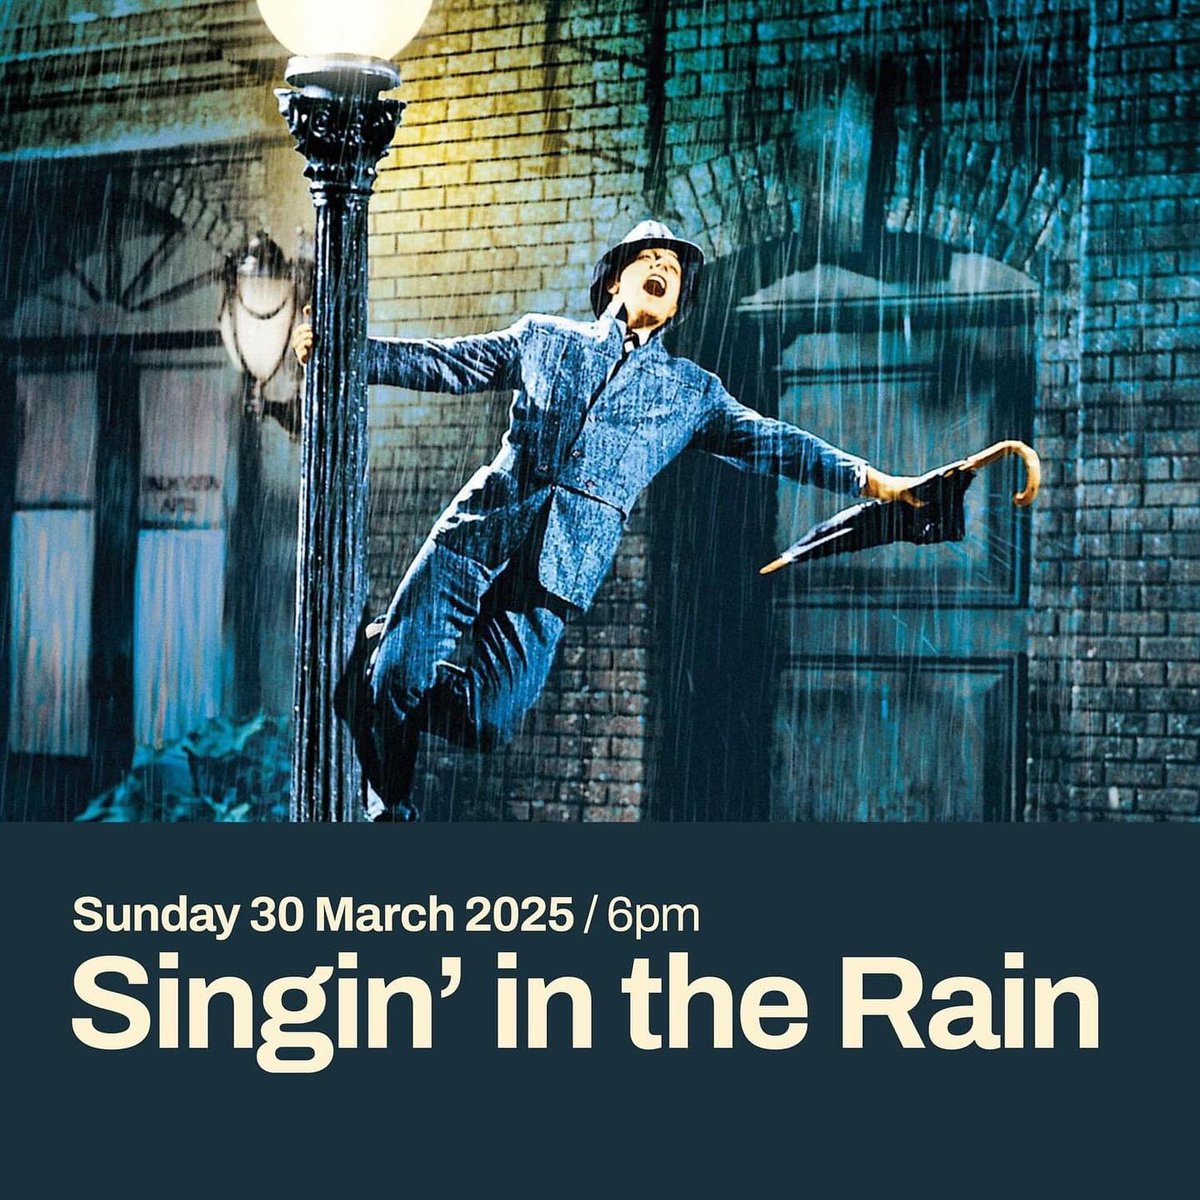 ☔️ Such an incredible feeling to finally get my hands on Singin’ in the Rain, a score that’s been top of my hit list for years. Thrilled to be bringing it to @glasshouseicm with the wonderful @RNSinfonia on Sun 30 Mar 2025. theglasshouseicm.org/whats-on/singi…